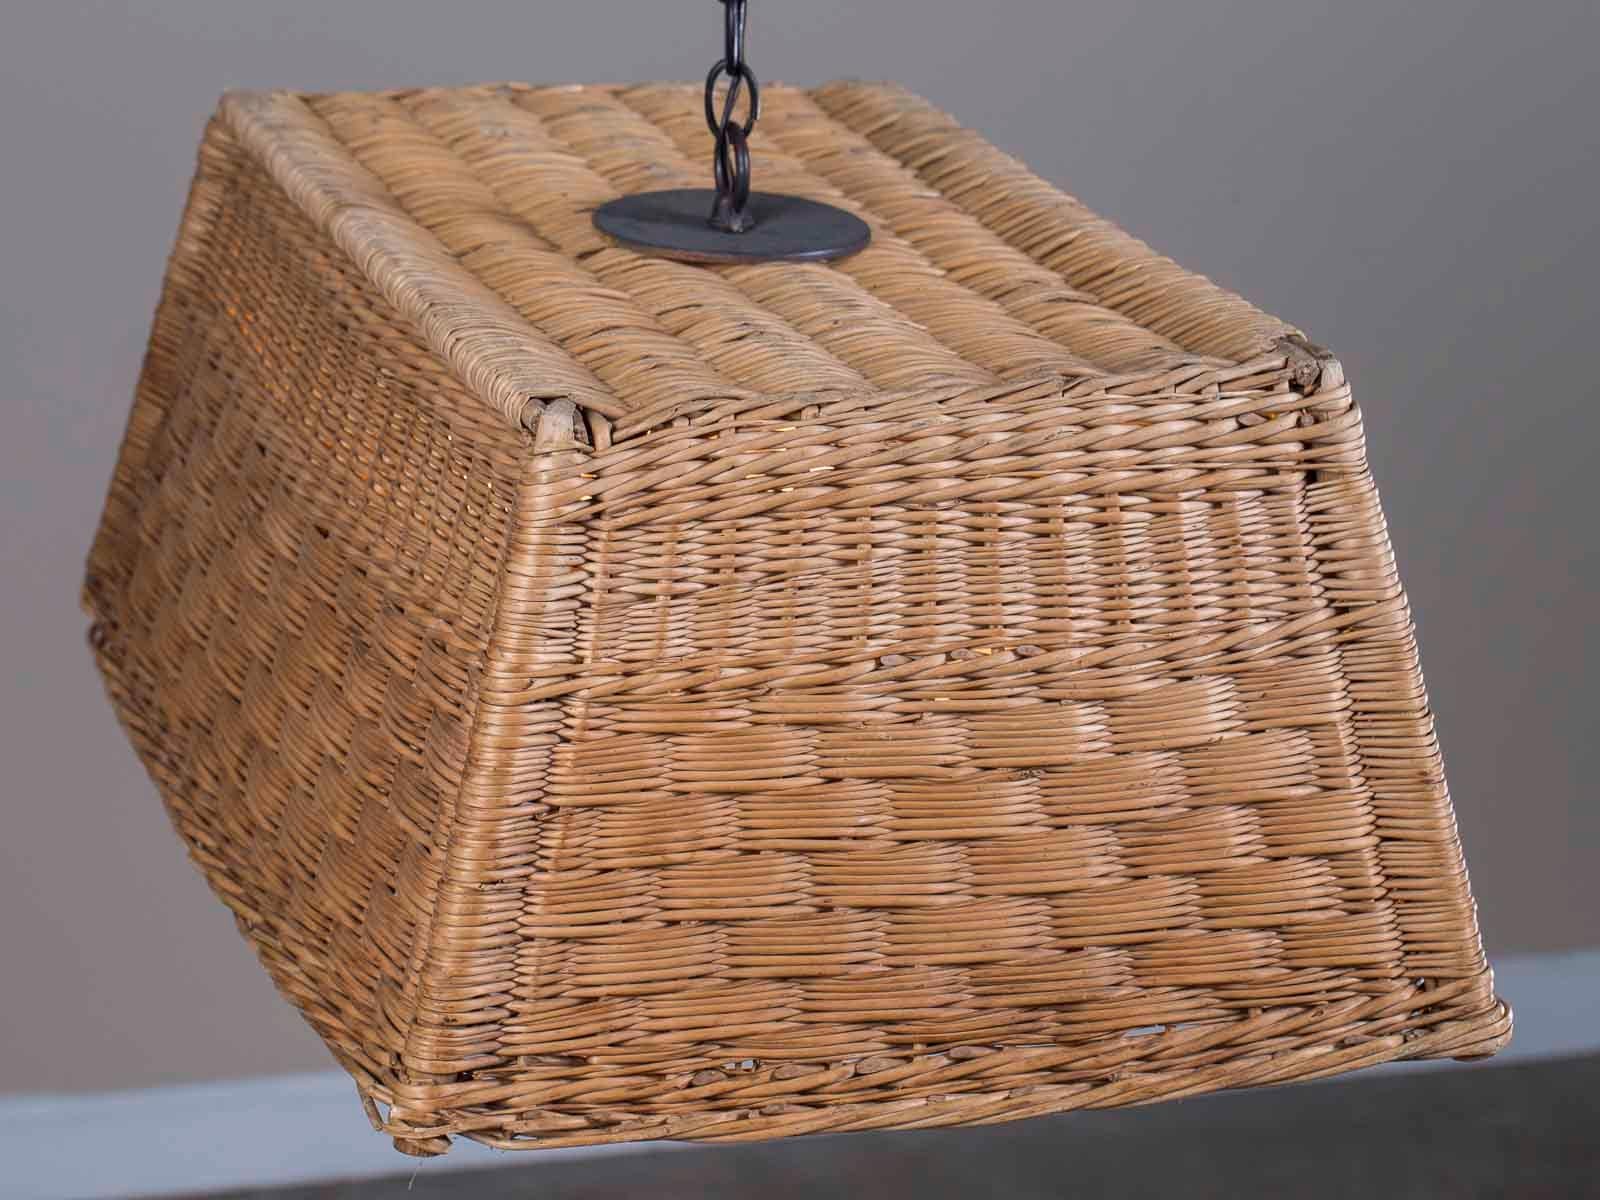 An unusual vintage French woven basket chandelier from France circa 1920 converted into a custom modern light fixture. This essential component of French life, the rectangular woven basket, is in excellent condition with its wooden frame providing a